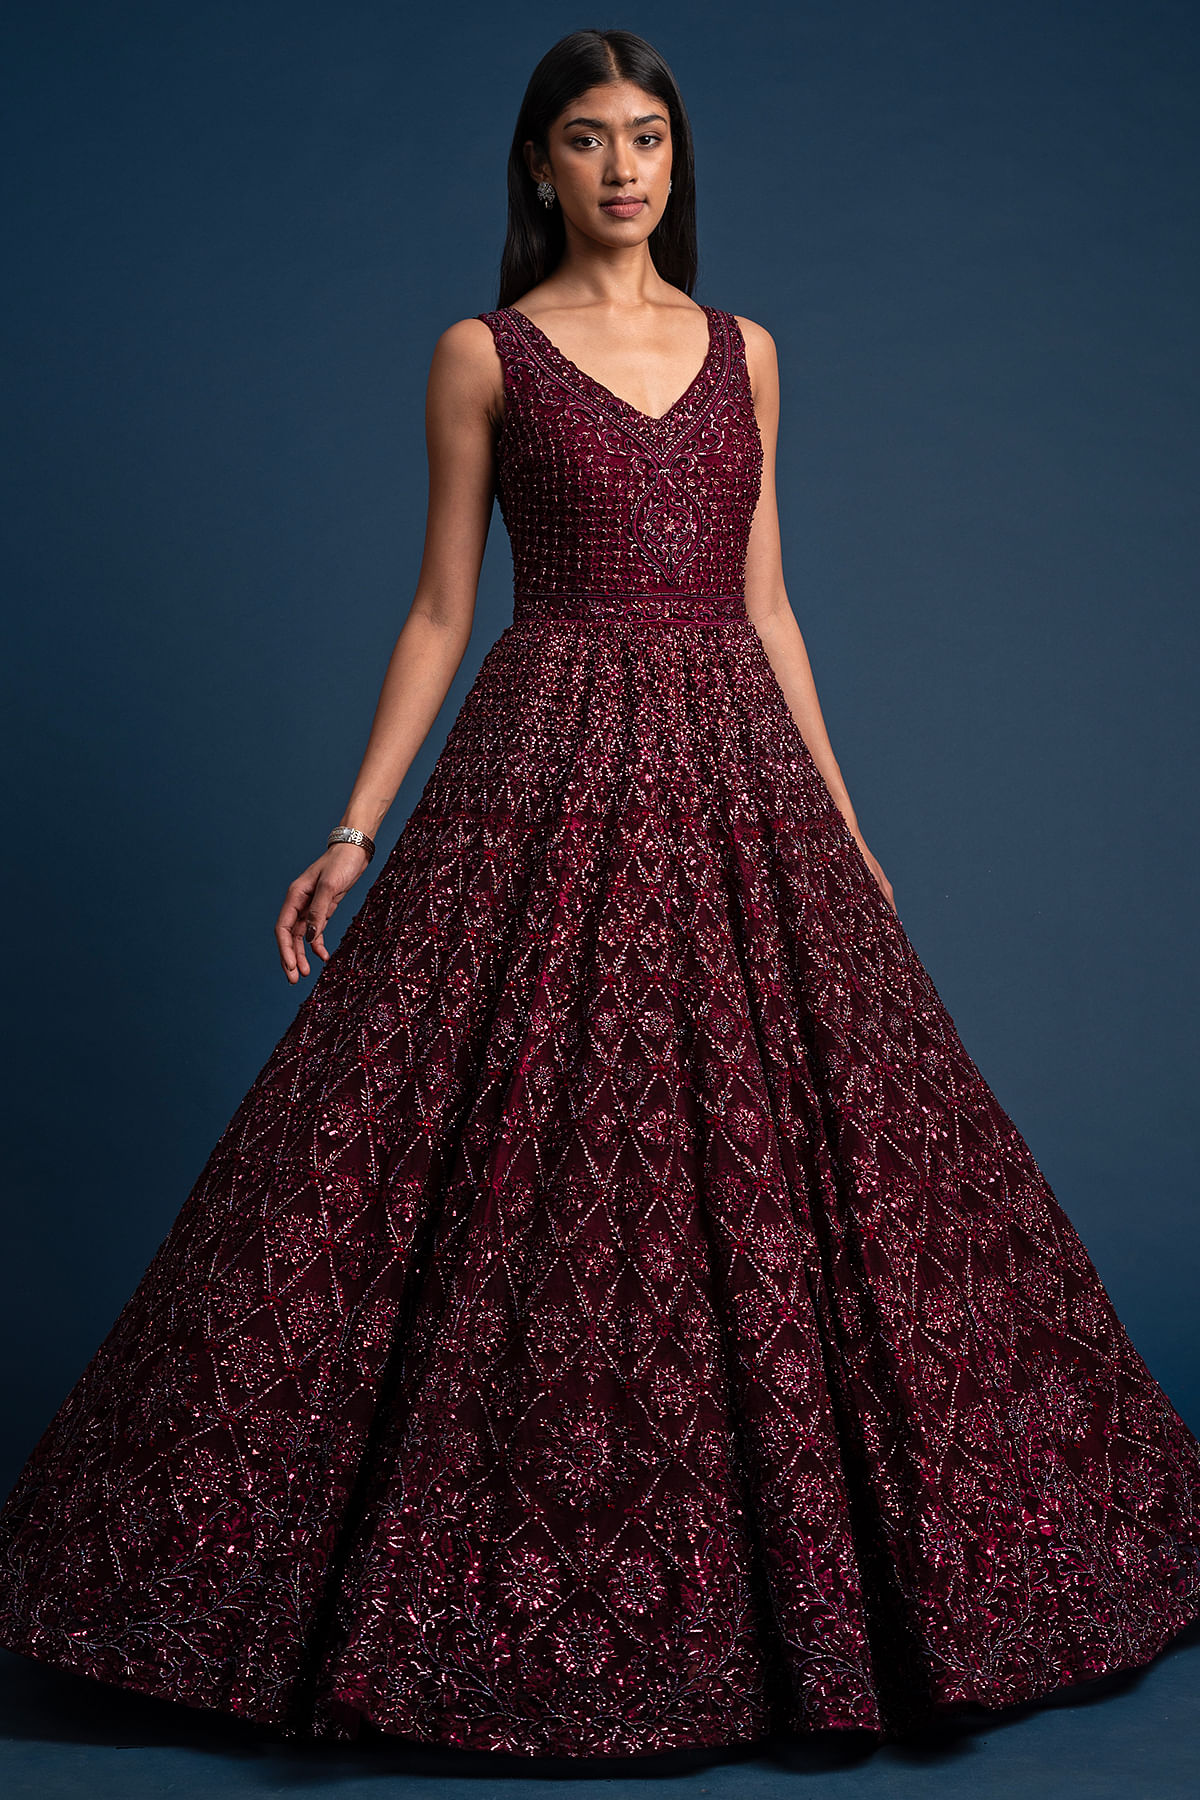 Day & Night: 5 Indian Wedding Reception Dresses For the Bride's Look Book